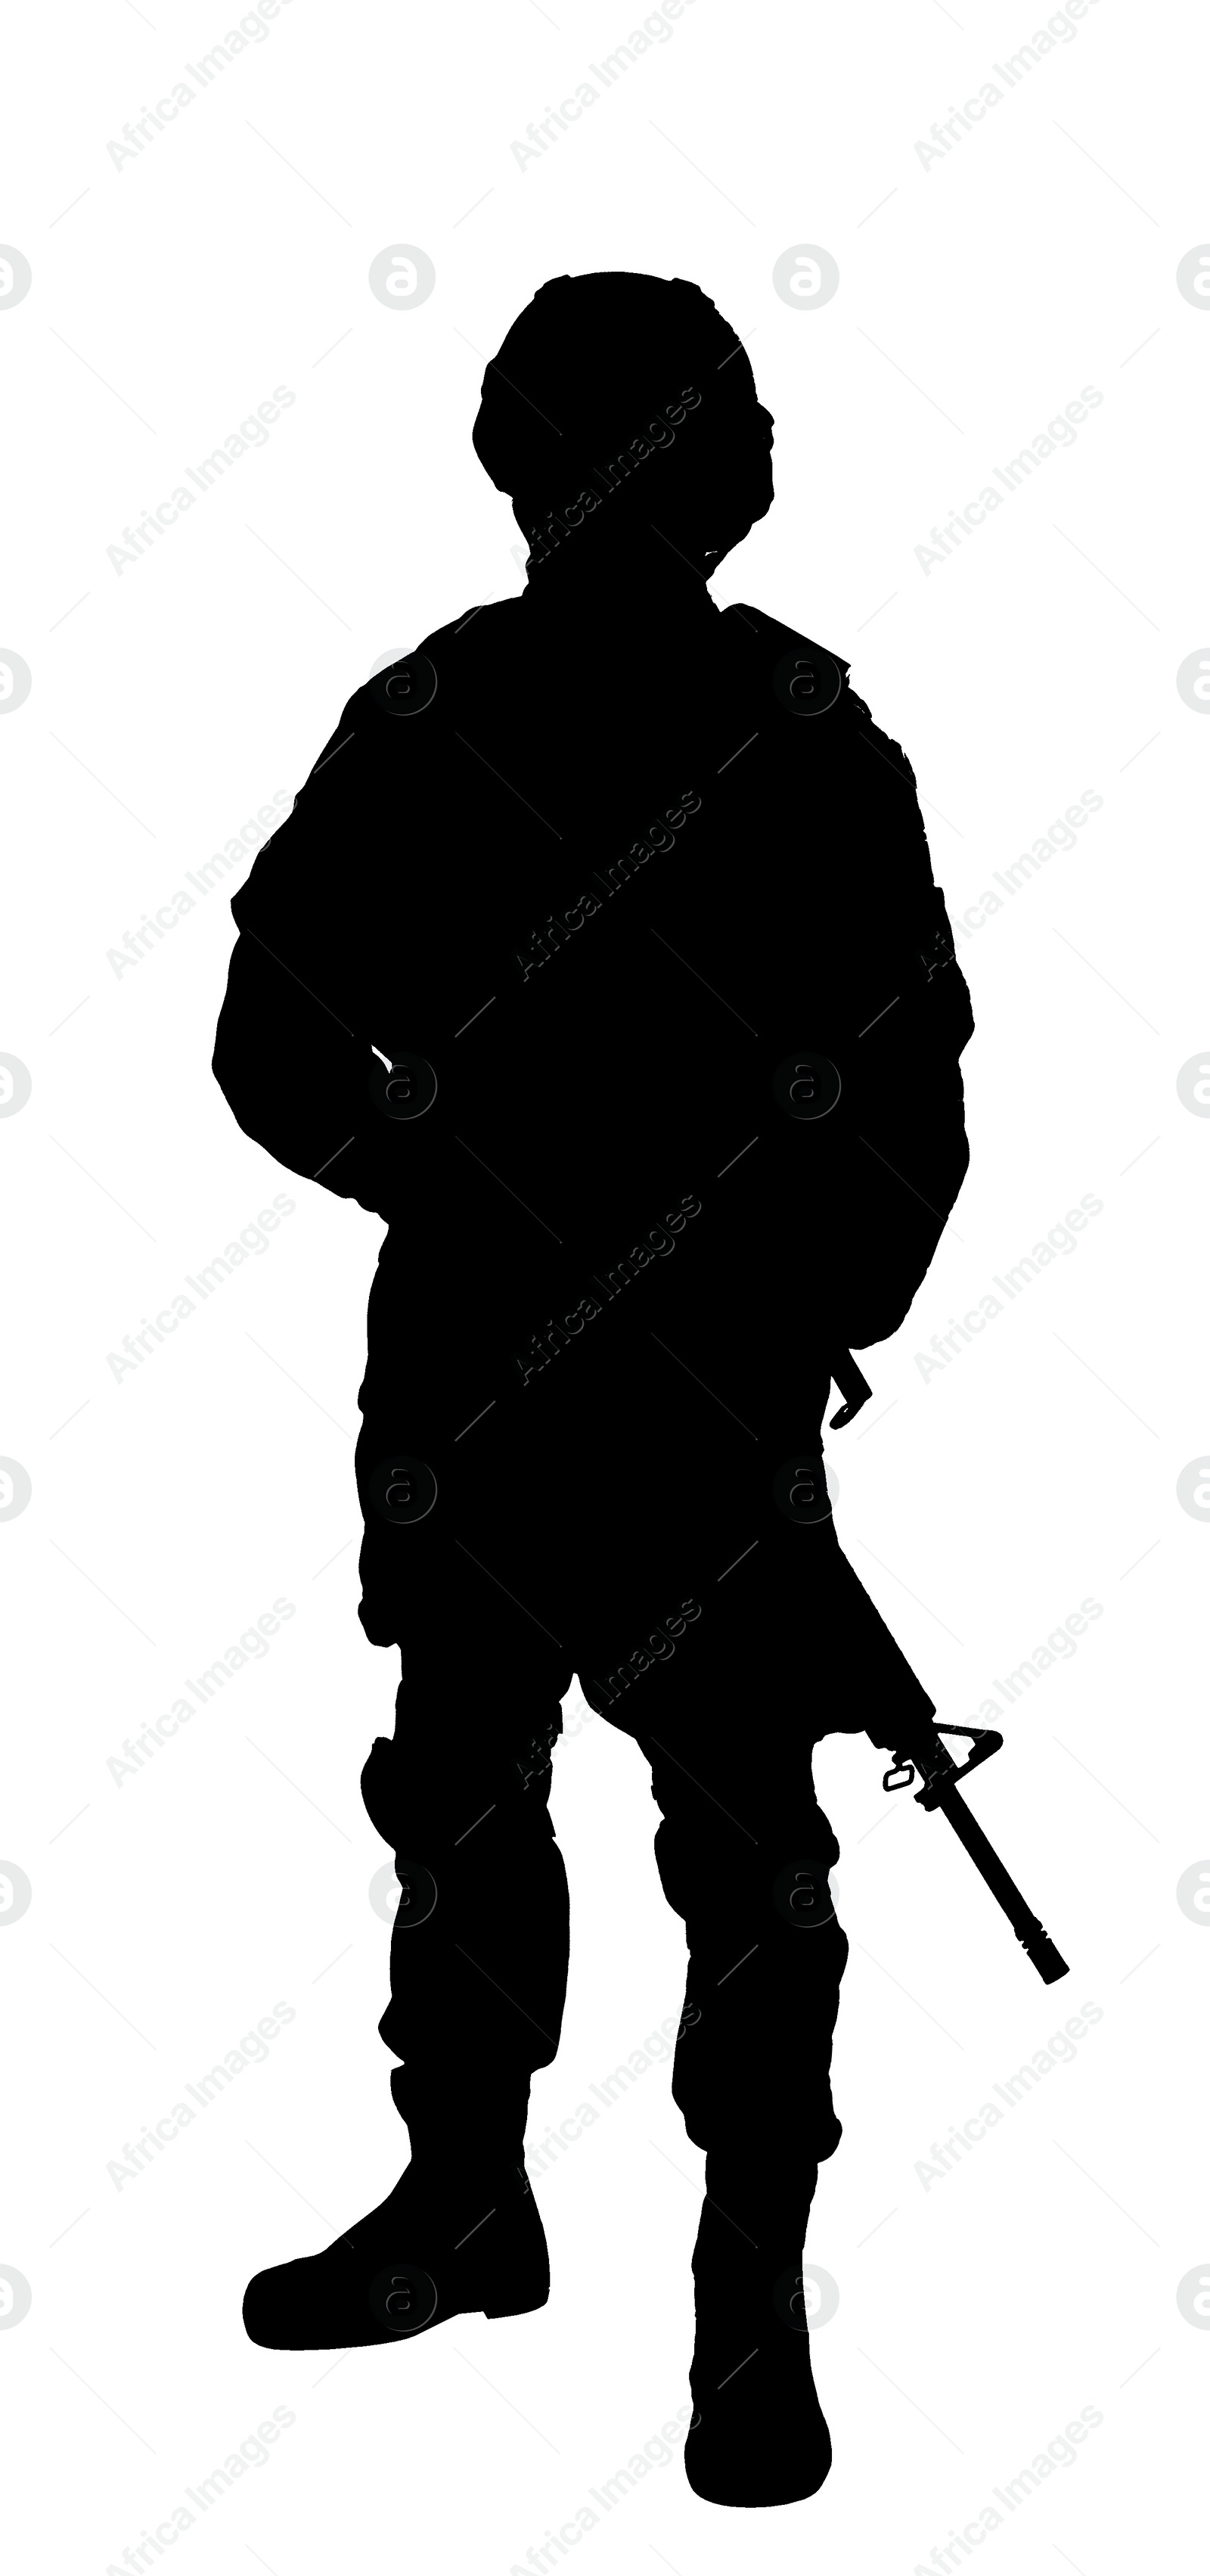 Image of Silhouette of soldier with assault rifle on white background. Military service